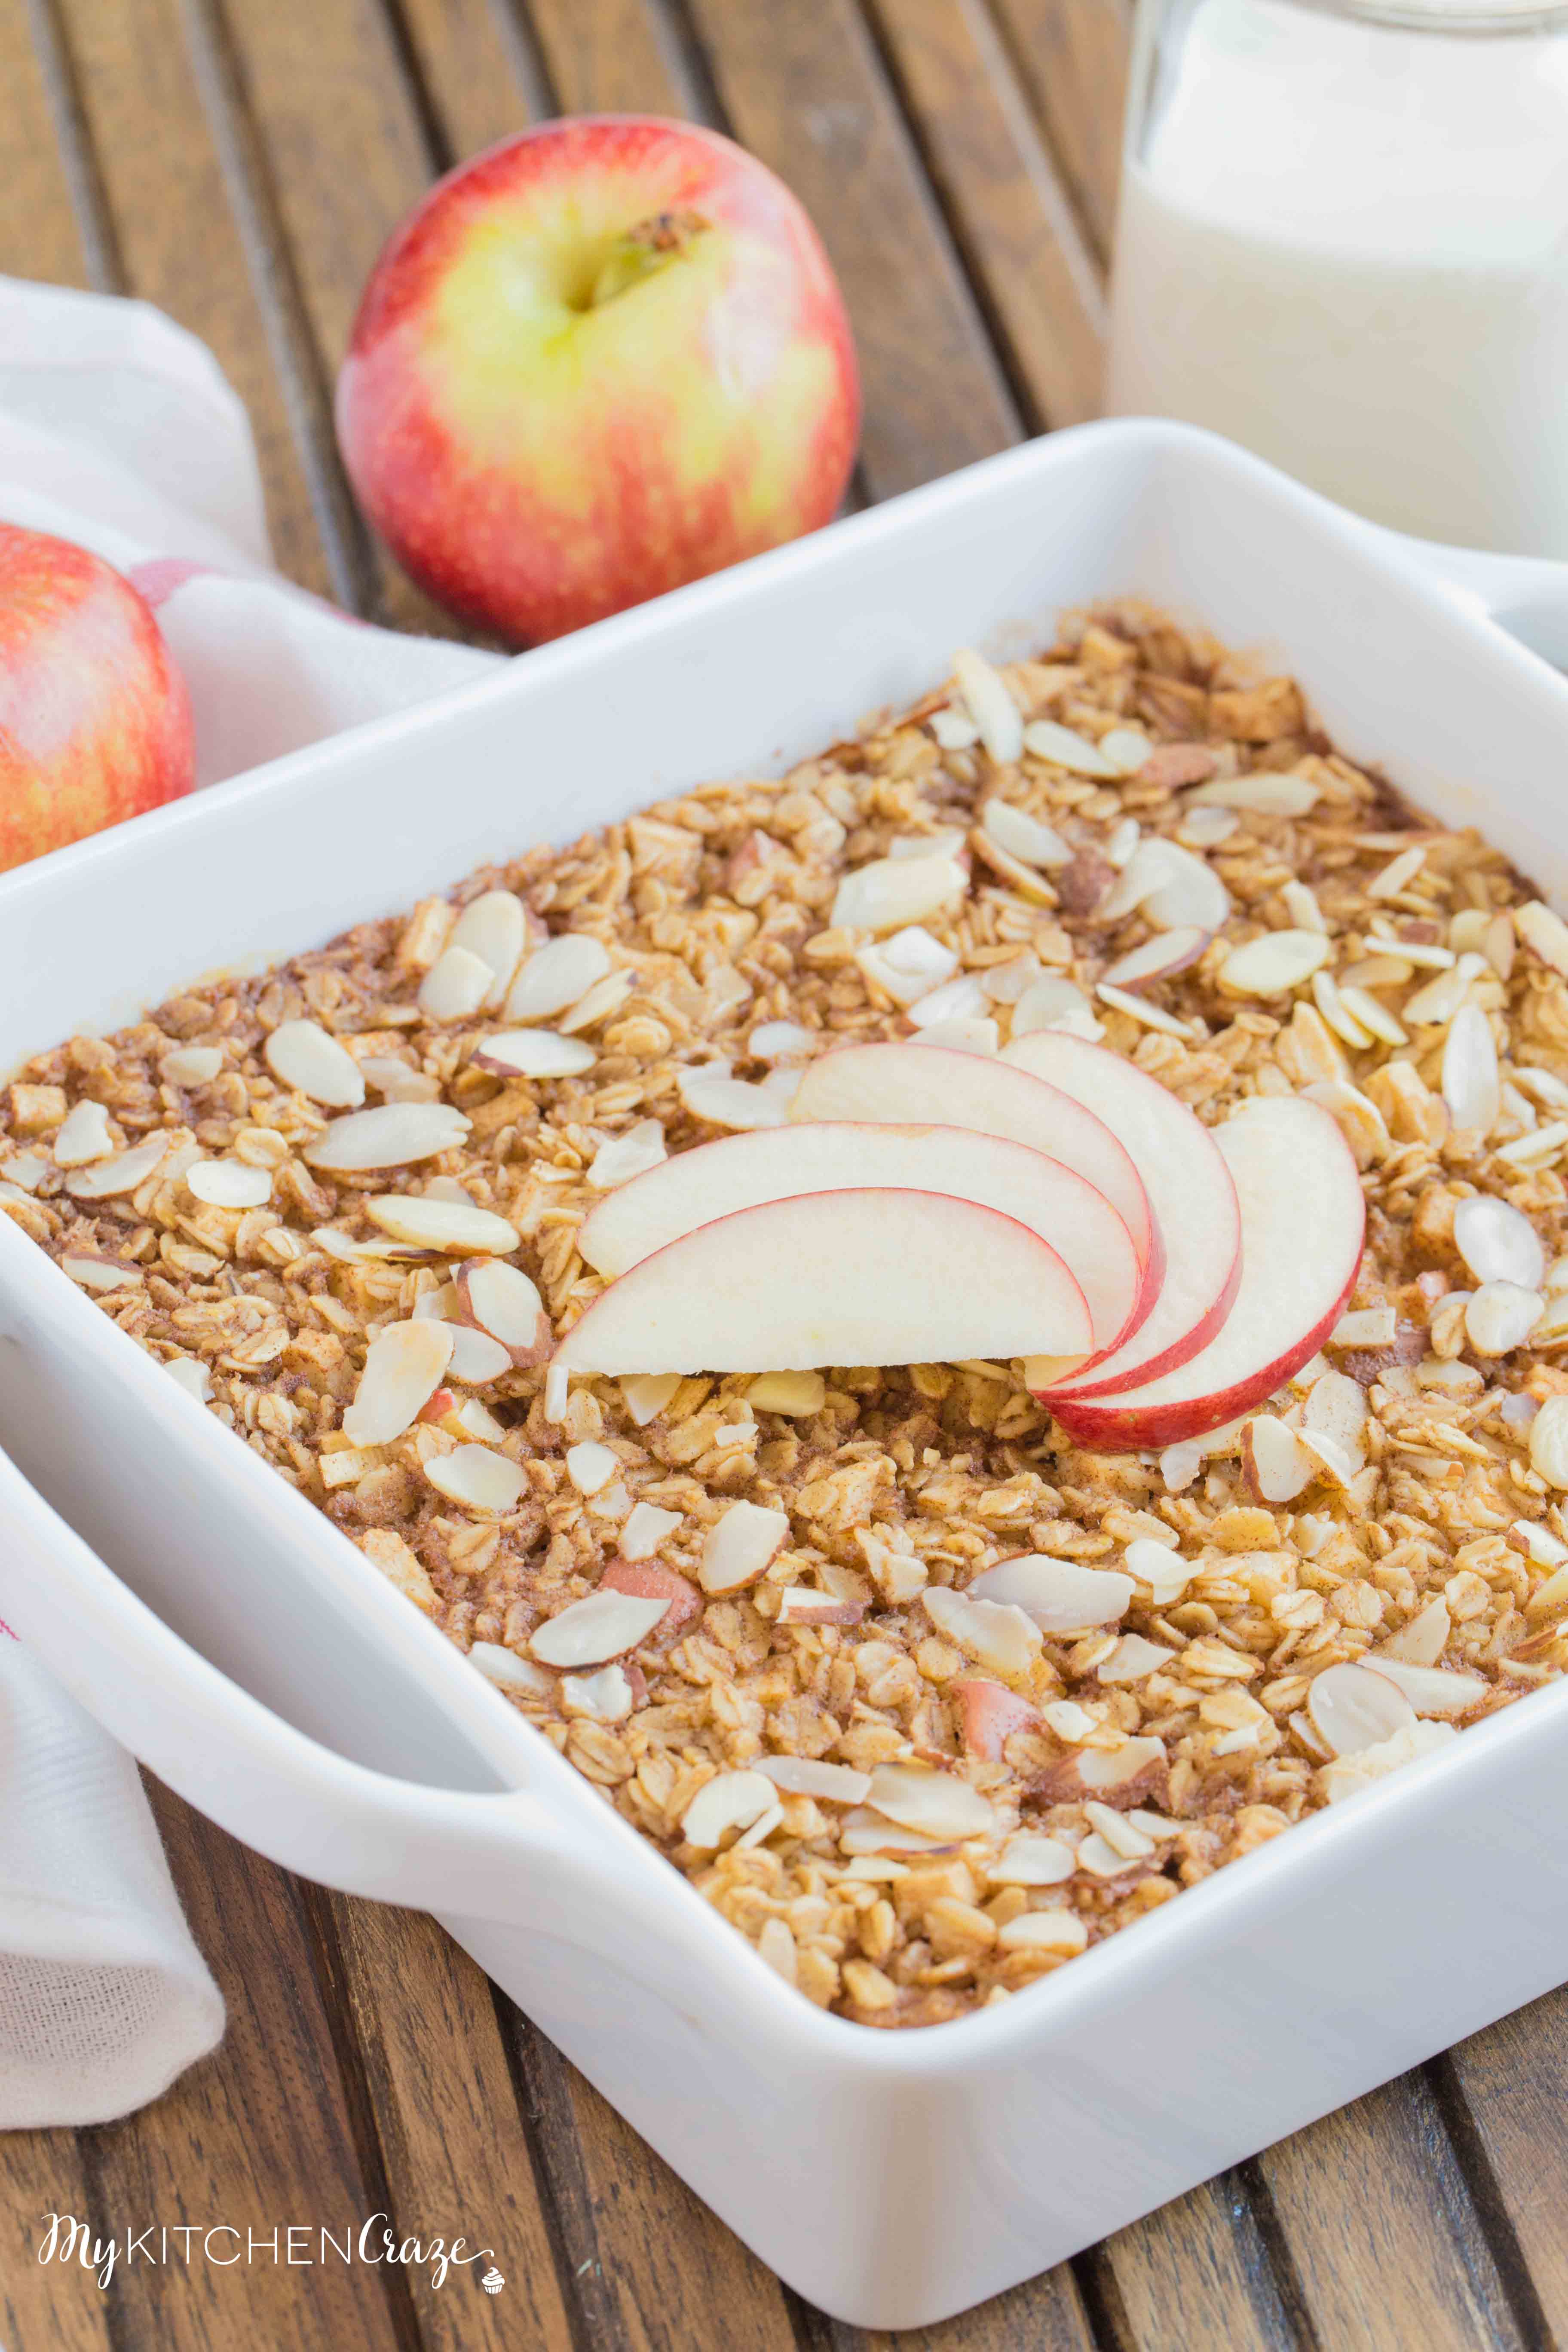 Apple Cinnamon Baked Oatmeal ~ mykitchencraze.com ~ This baked oatmeal is prepared within minutes and is perfect for a hearty breakfast!